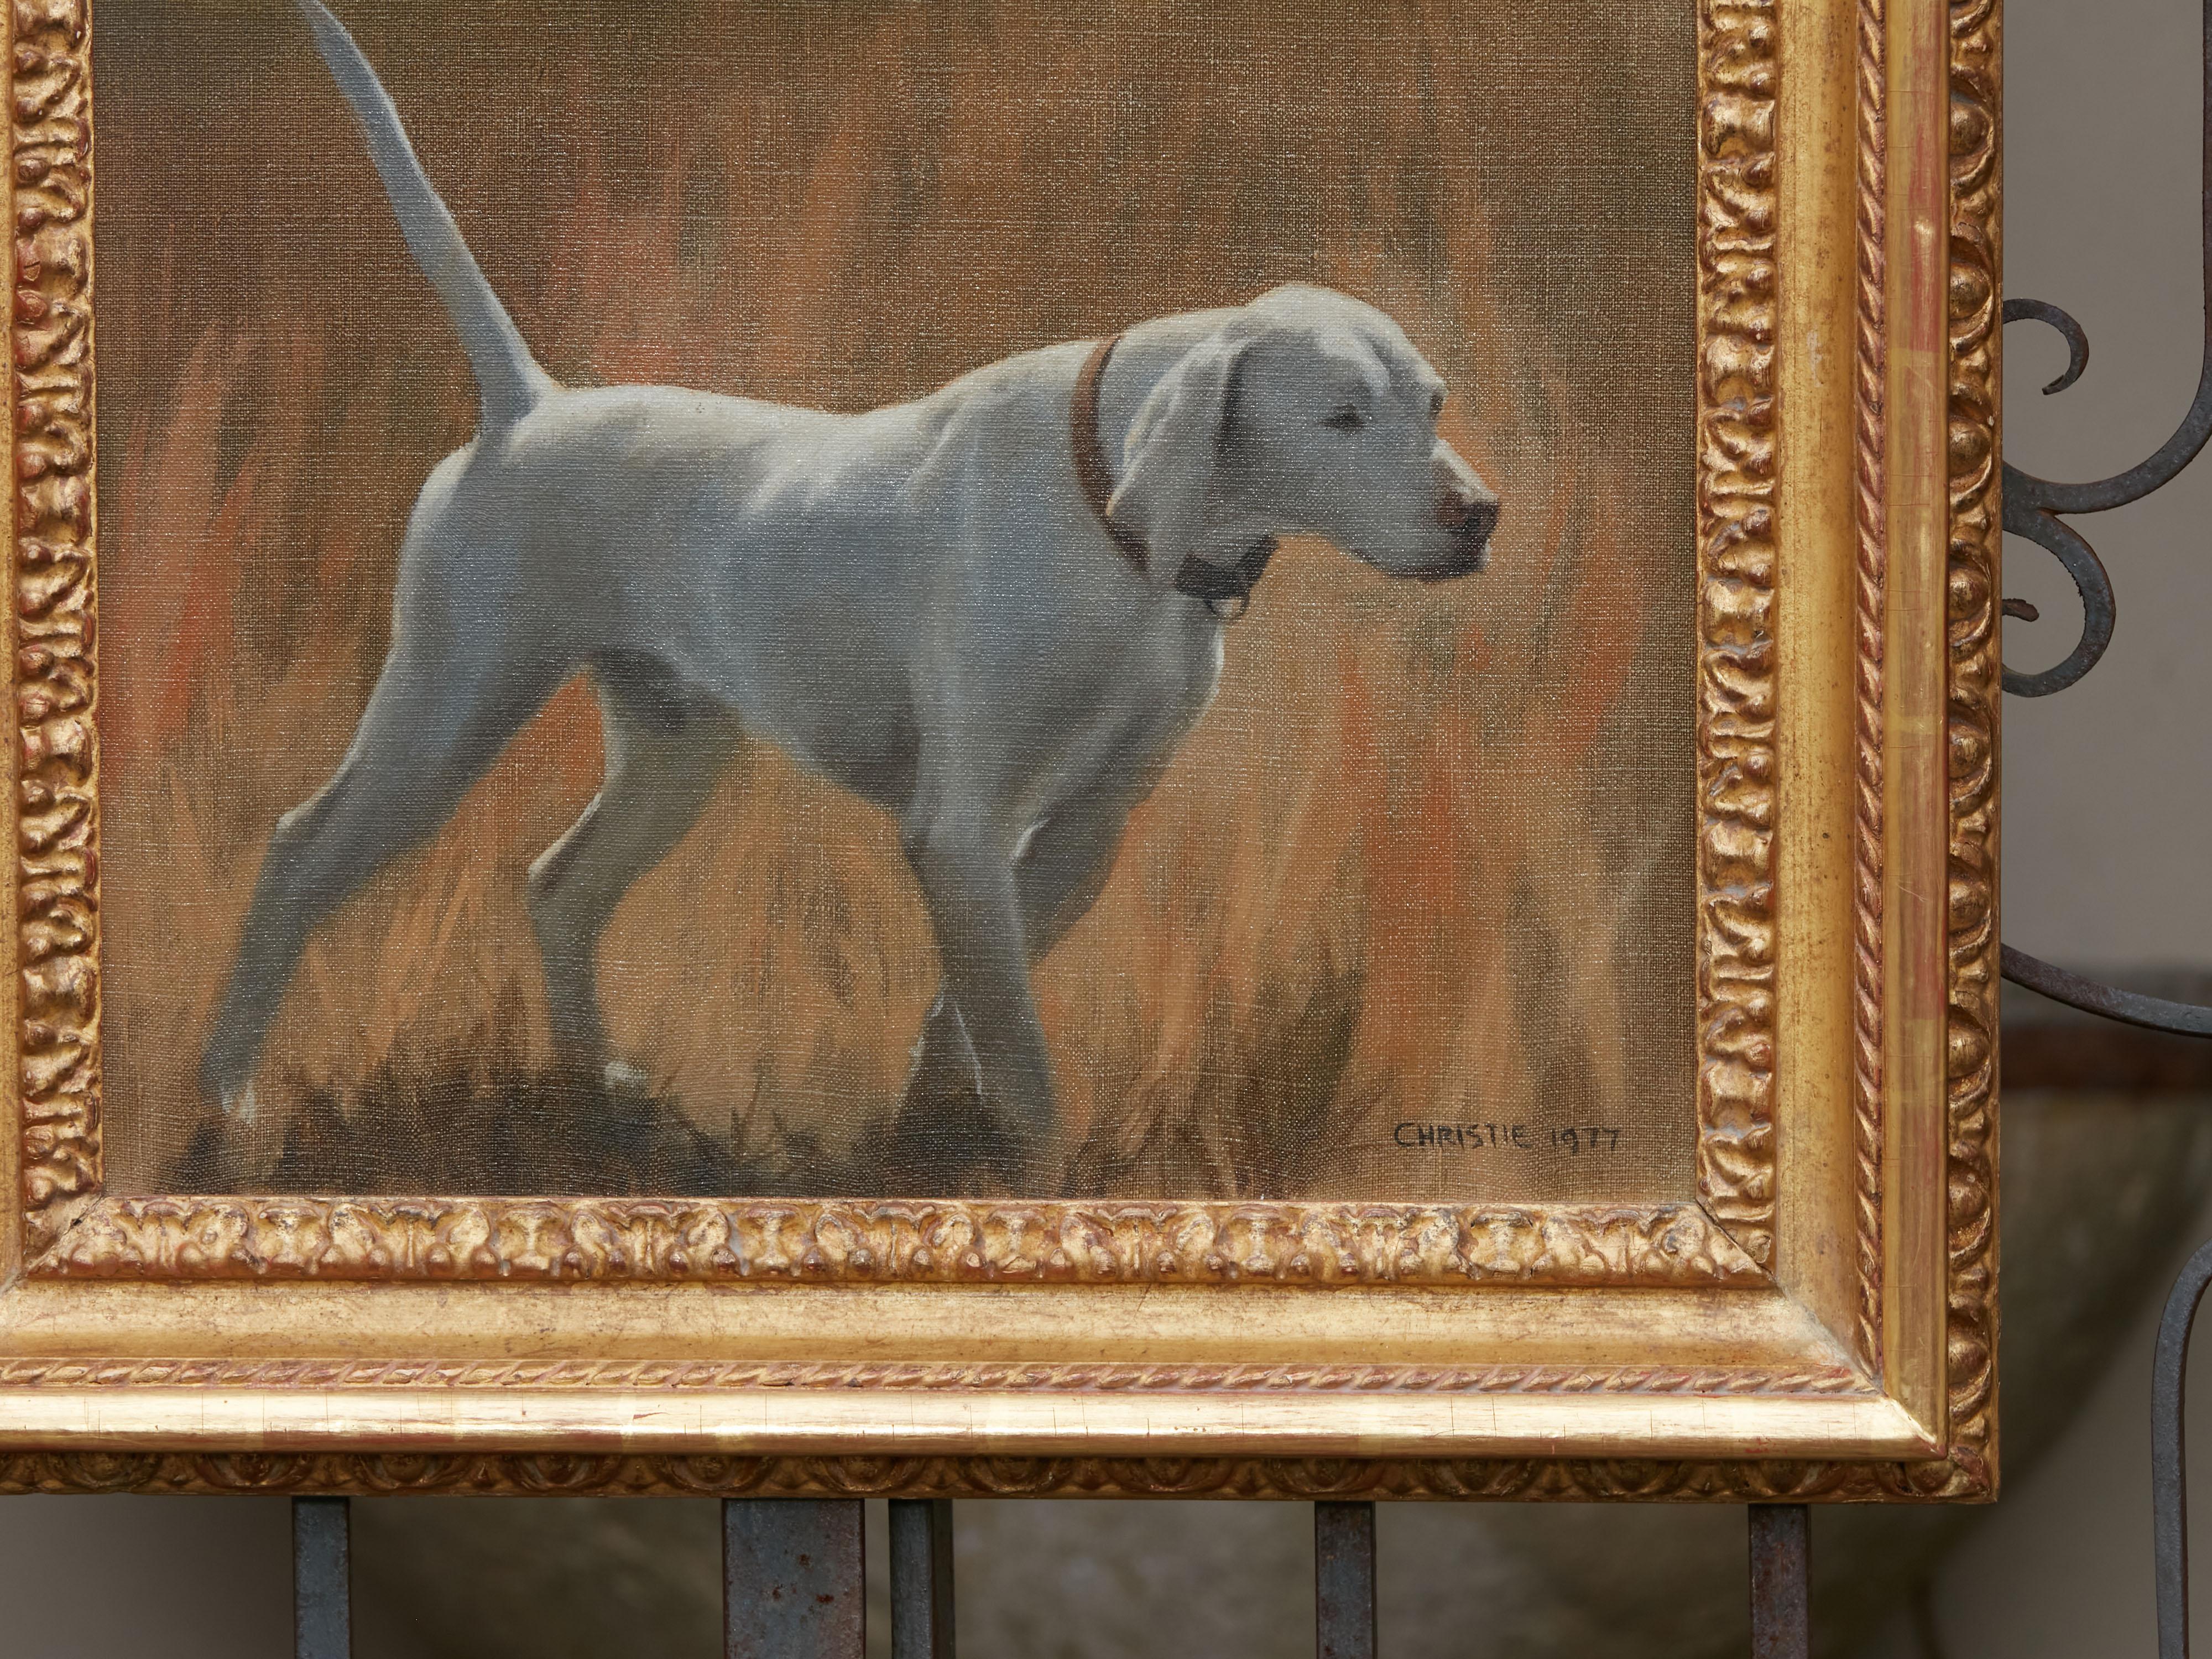 Hand-Painted Oil on Canvas Painting of a Sporting Dog in Giltwood Frame, Signed Christie